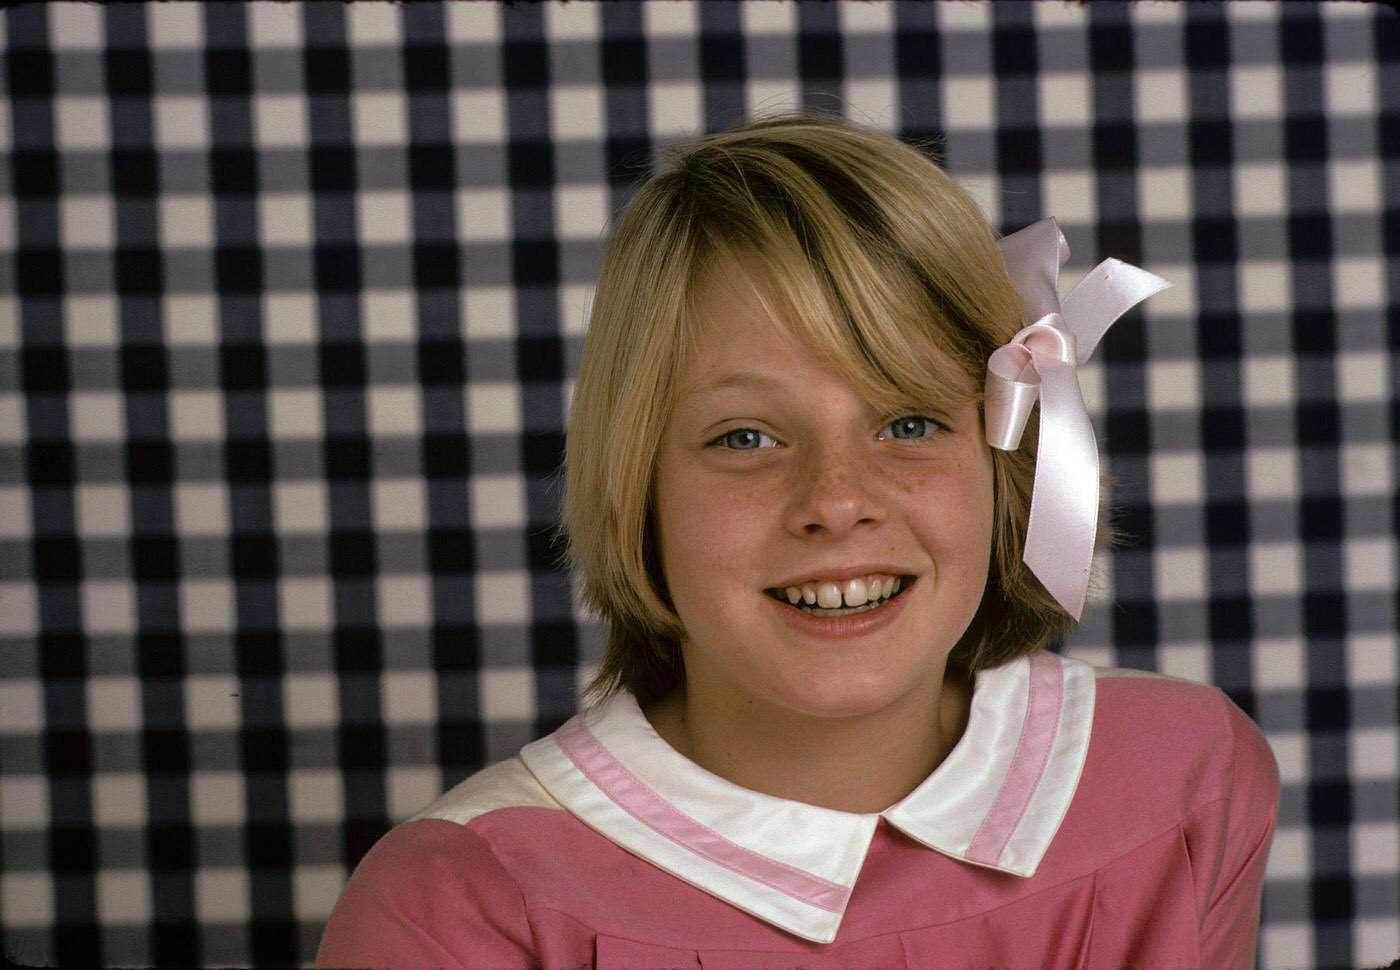 Jodie Foster in 'Paper Moon', May 28, 1974.